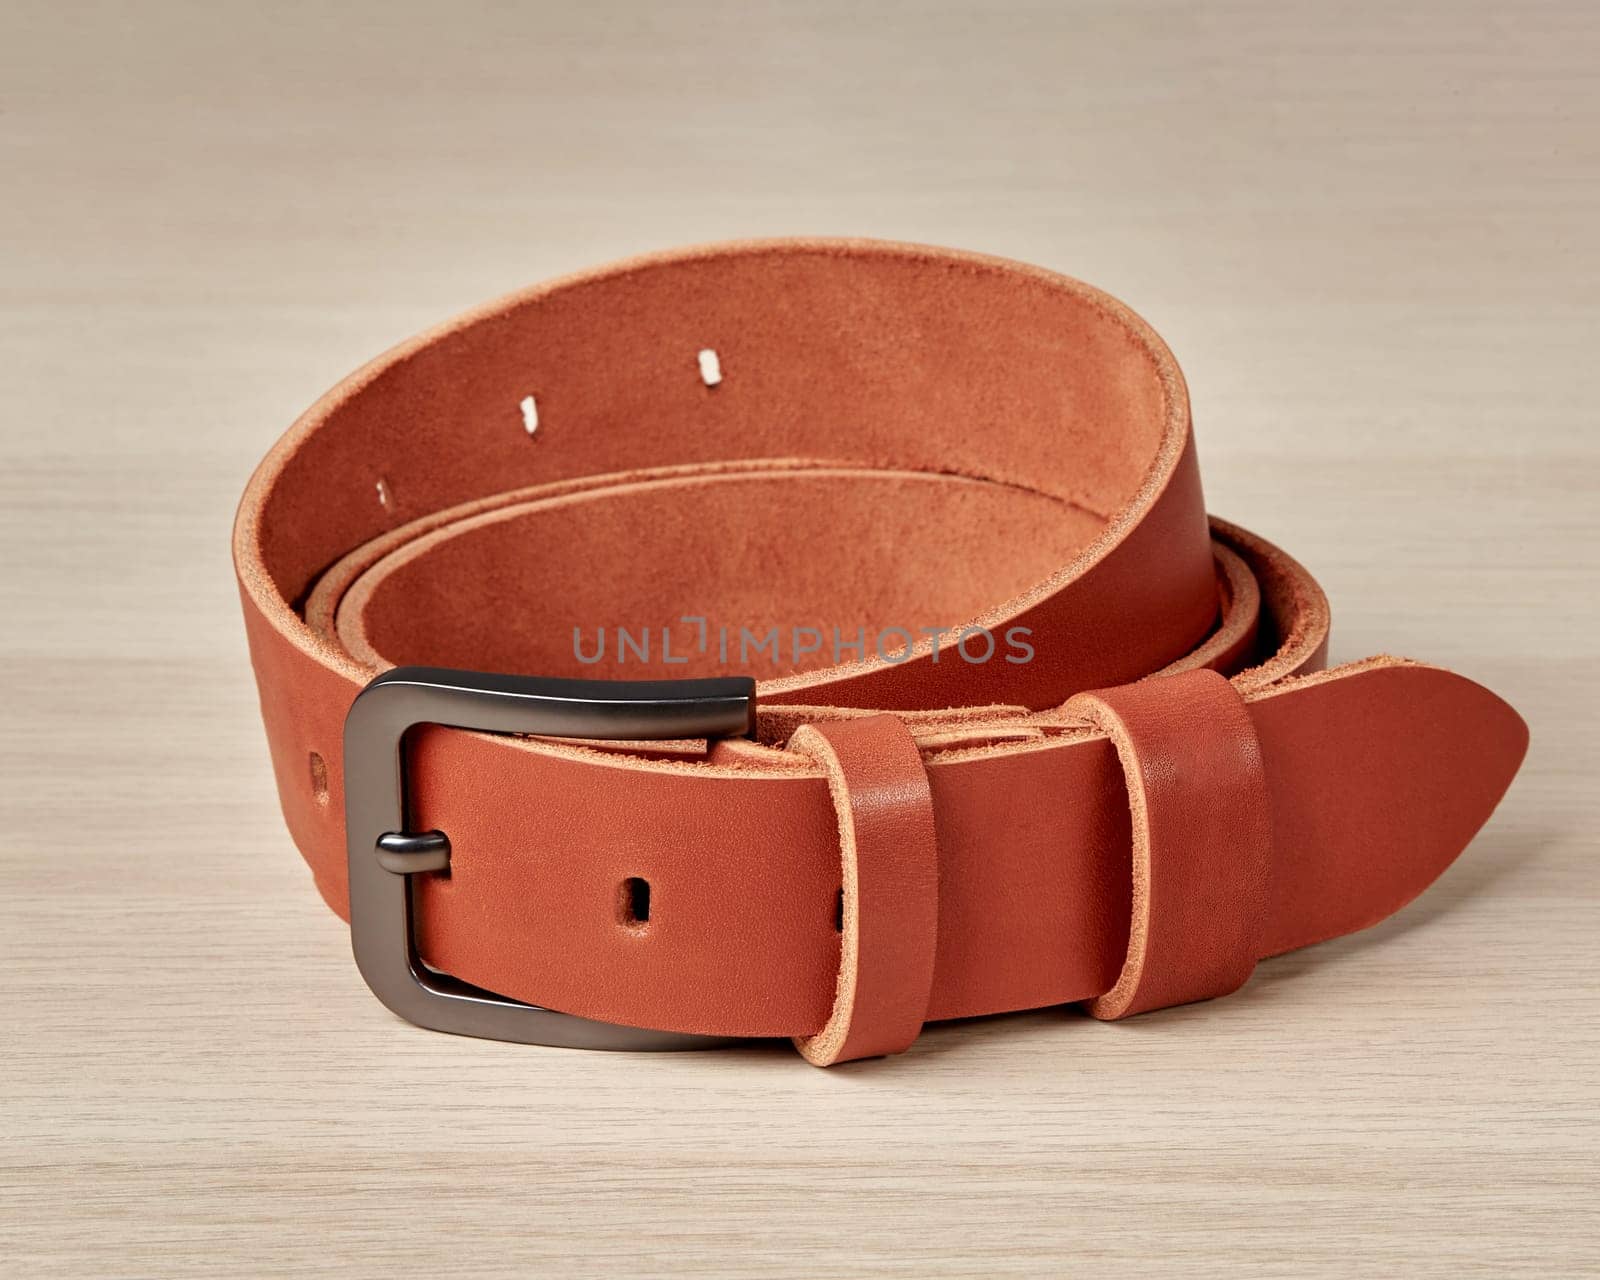 Folded on wooden surface, artisan terracotta leather belt with custom DAD inscription on loop, showcasing thoughtful blend of style and craftsmanship, ideal for gift for father